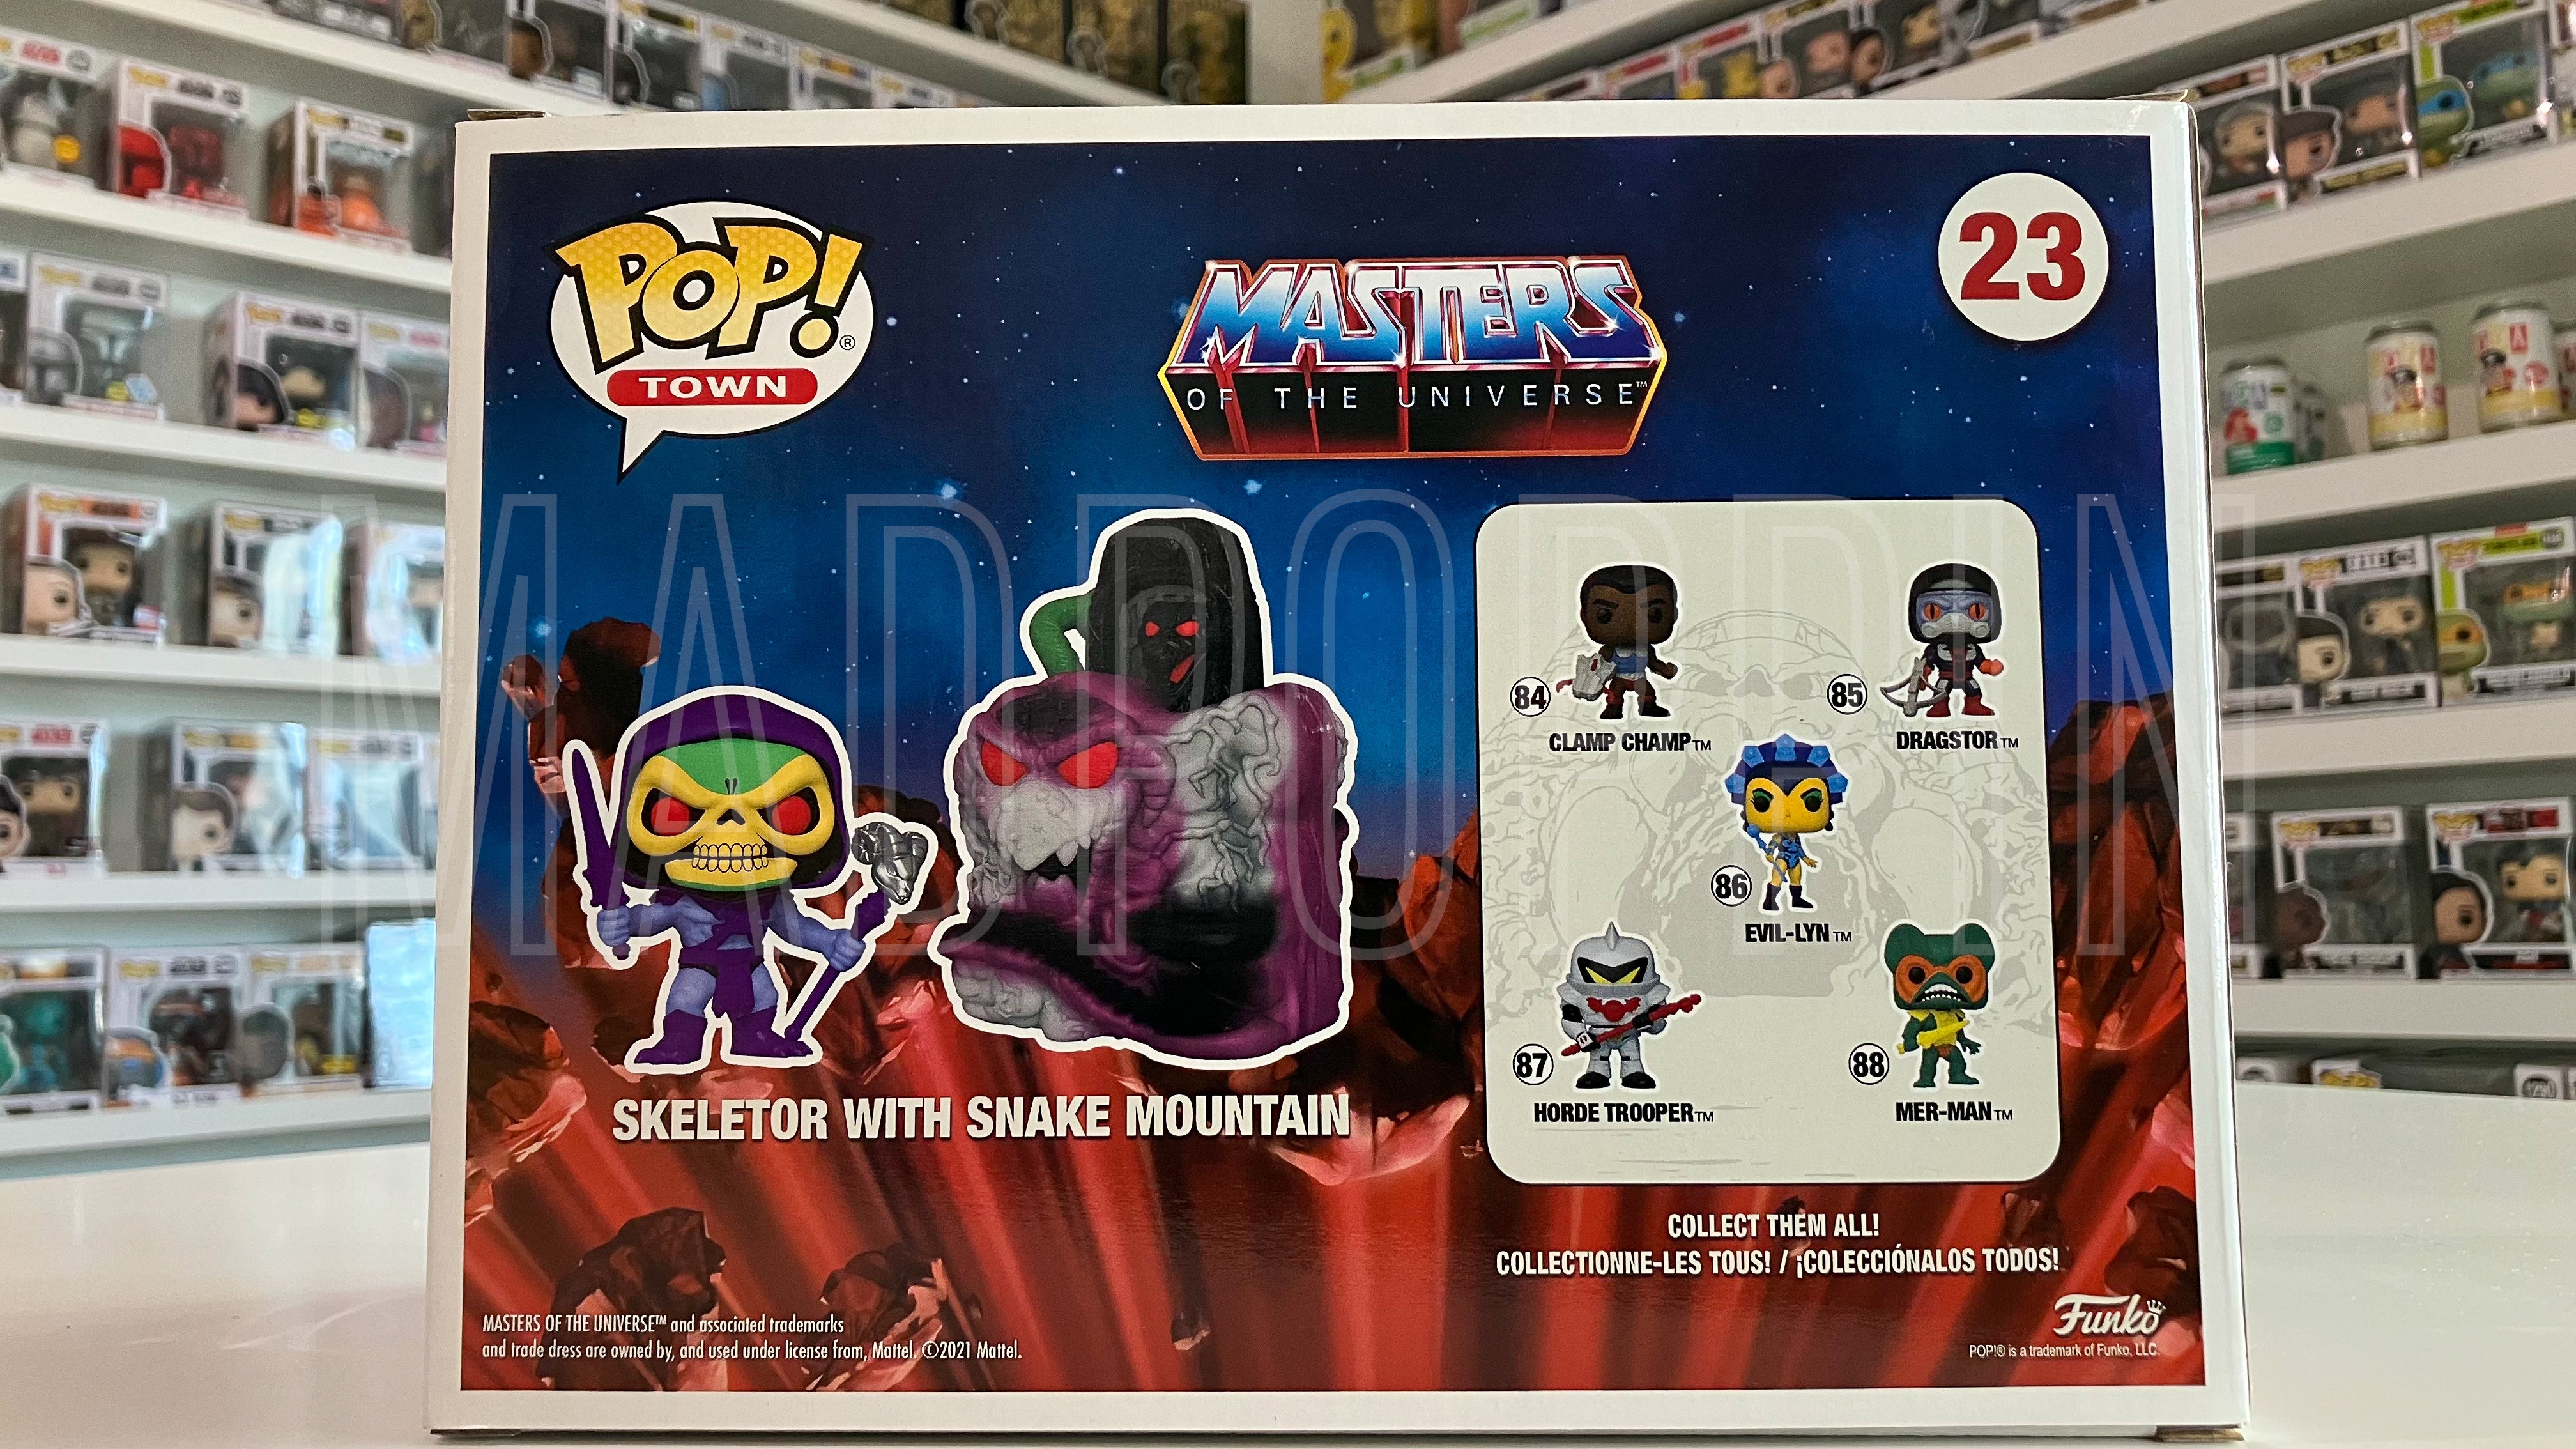 Funko POP! Town Masters of the Universe Skeletor with Snake Mountain #23